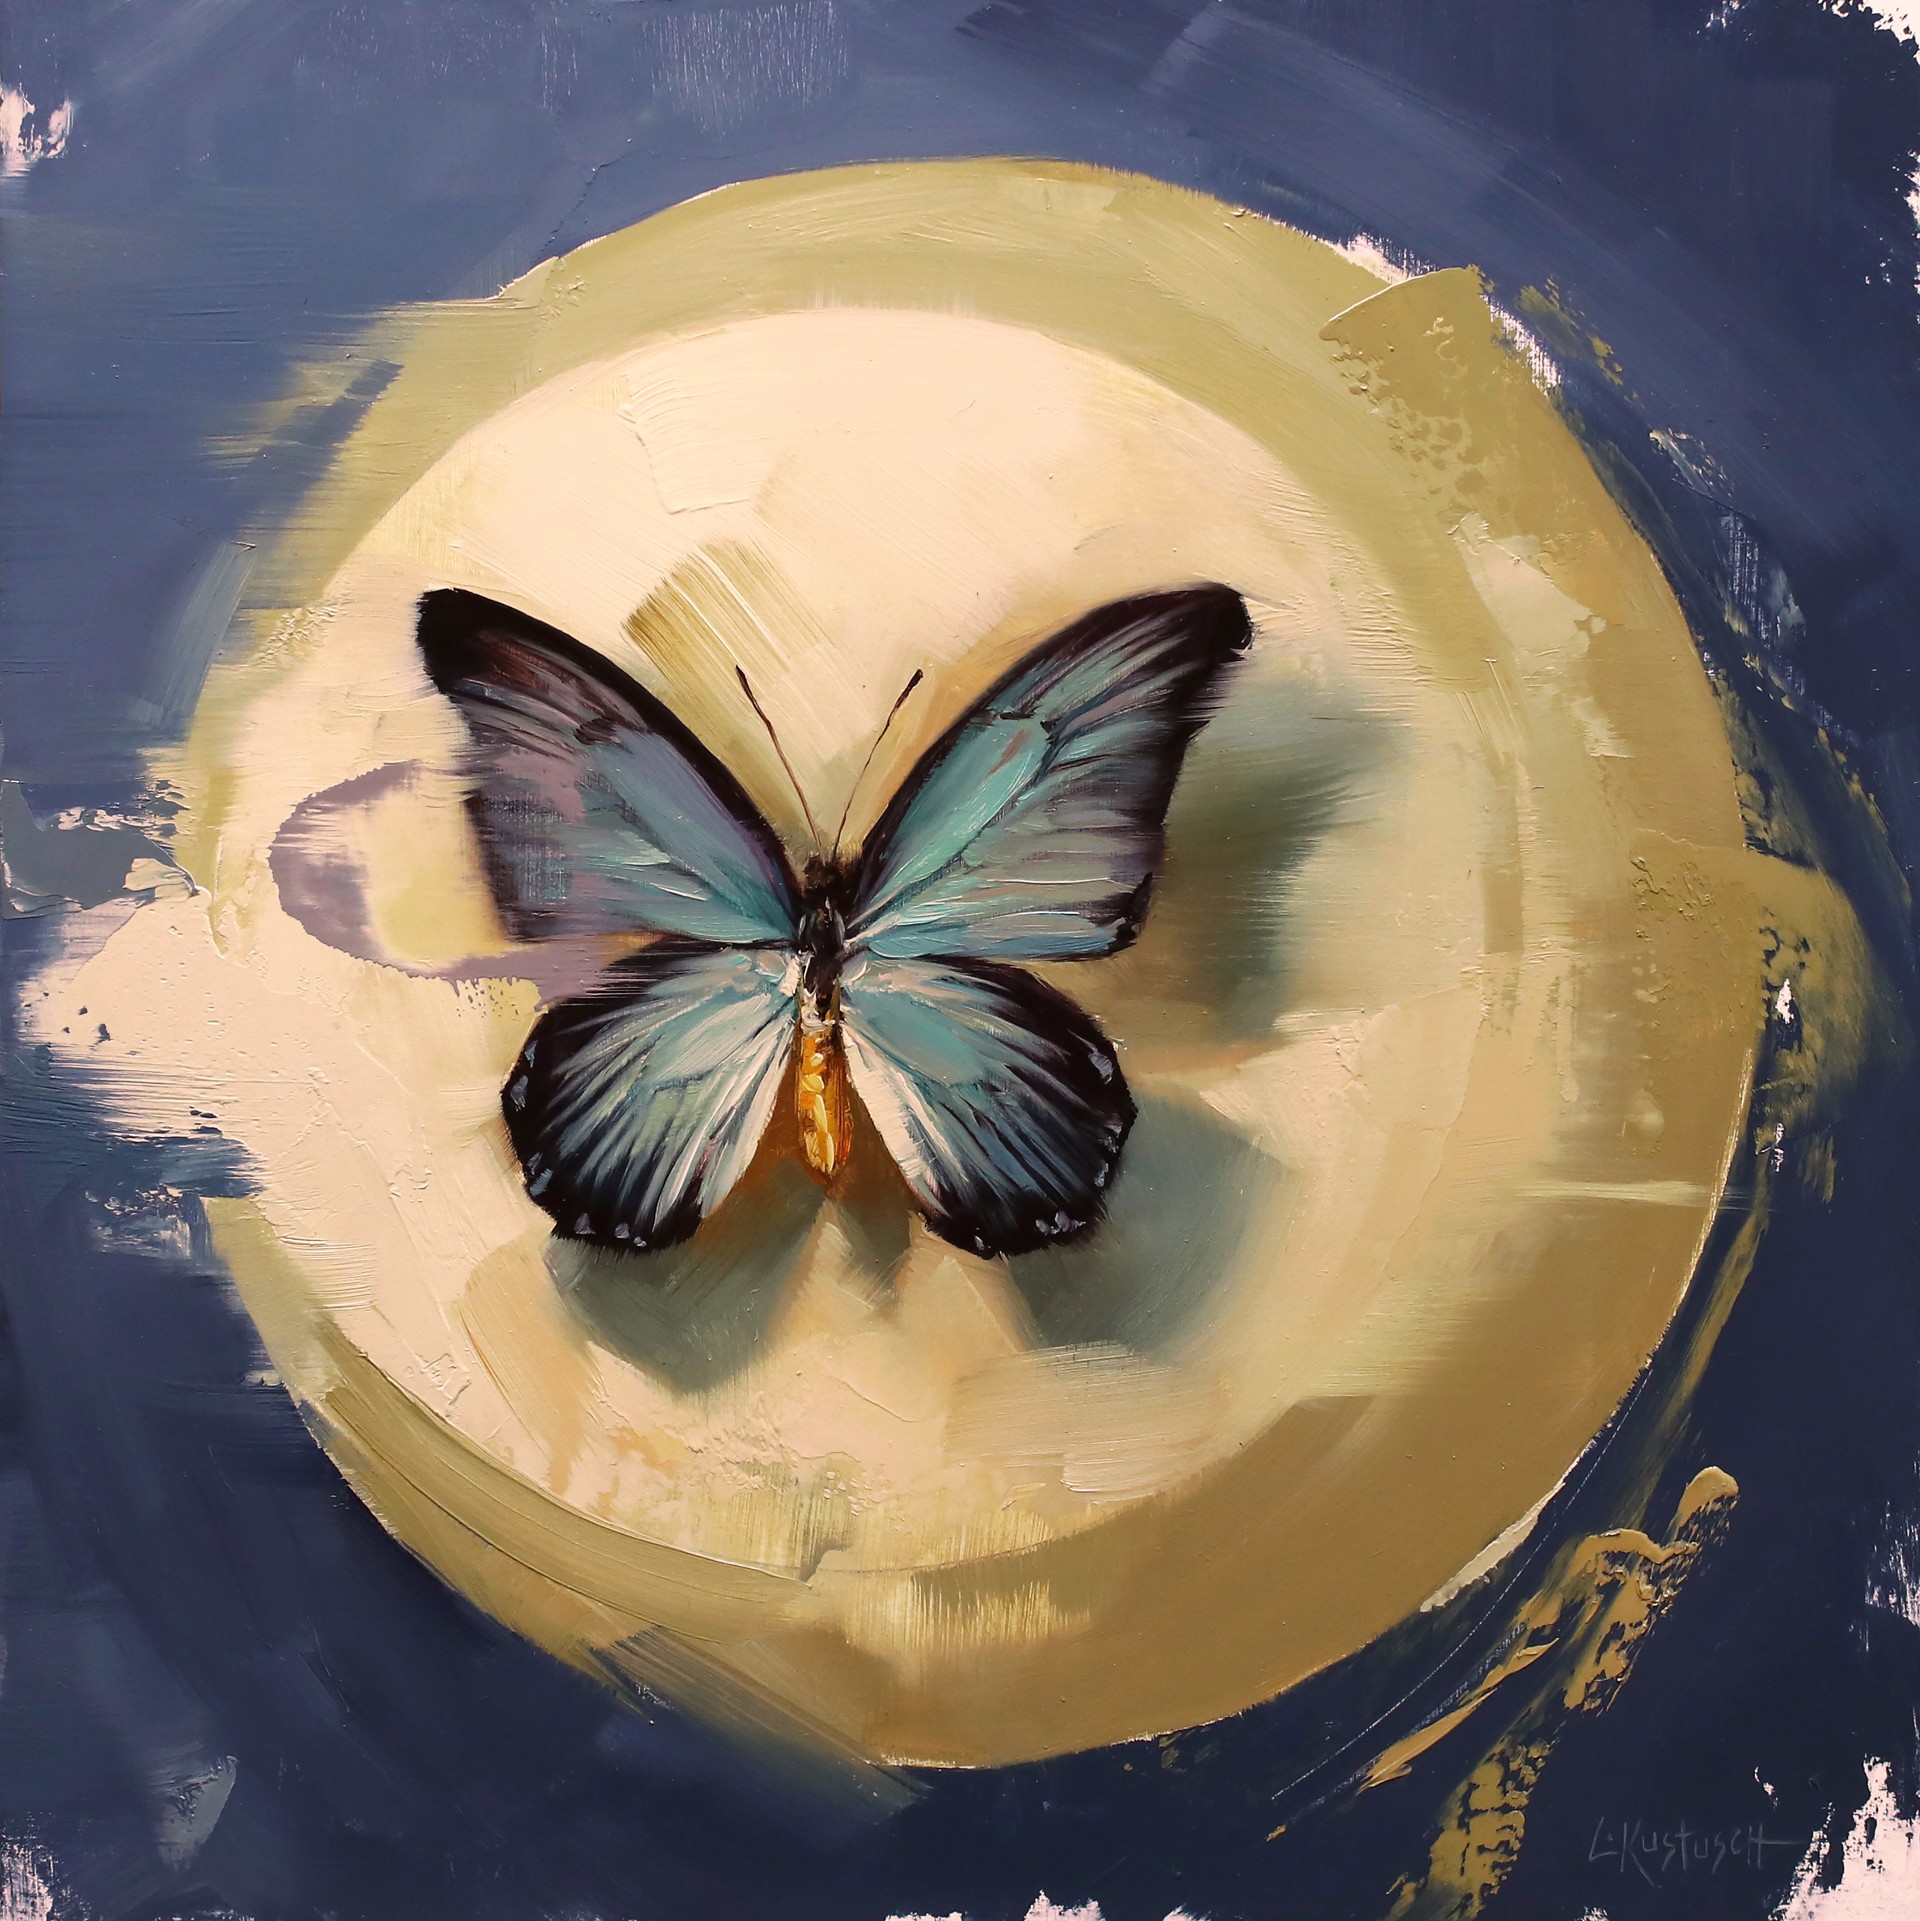 The Giant Blue Swallowtail on Shades of Indigo by Lindsey Kustusch